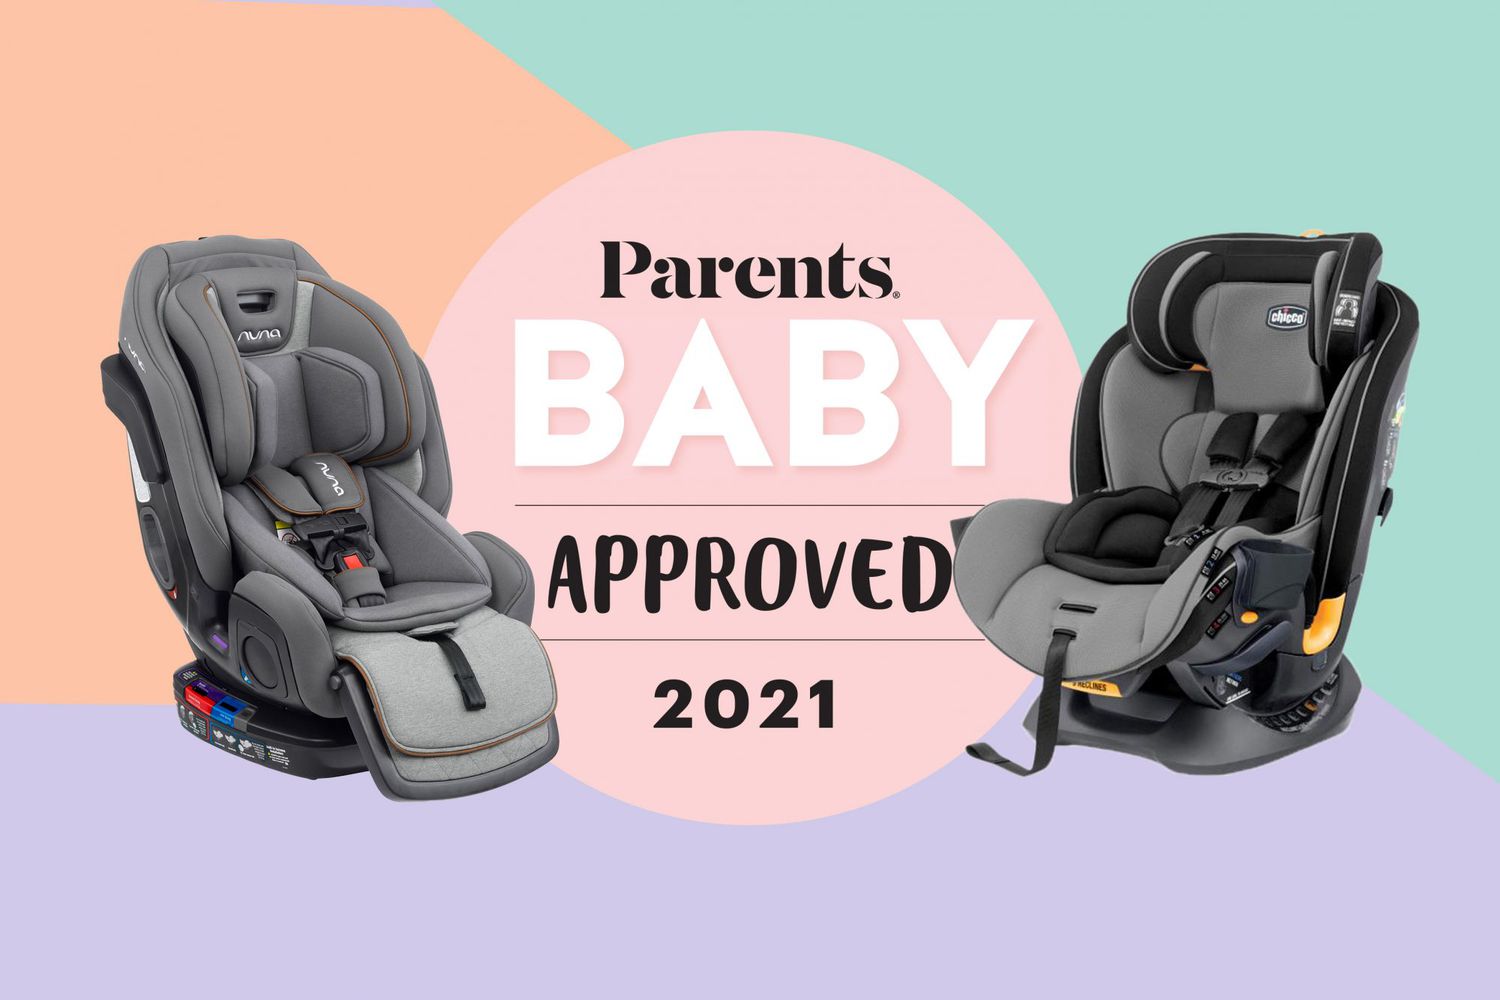 11 Best Convertible Car Seats 2021, What Are The Best Forward Facing Car Seats